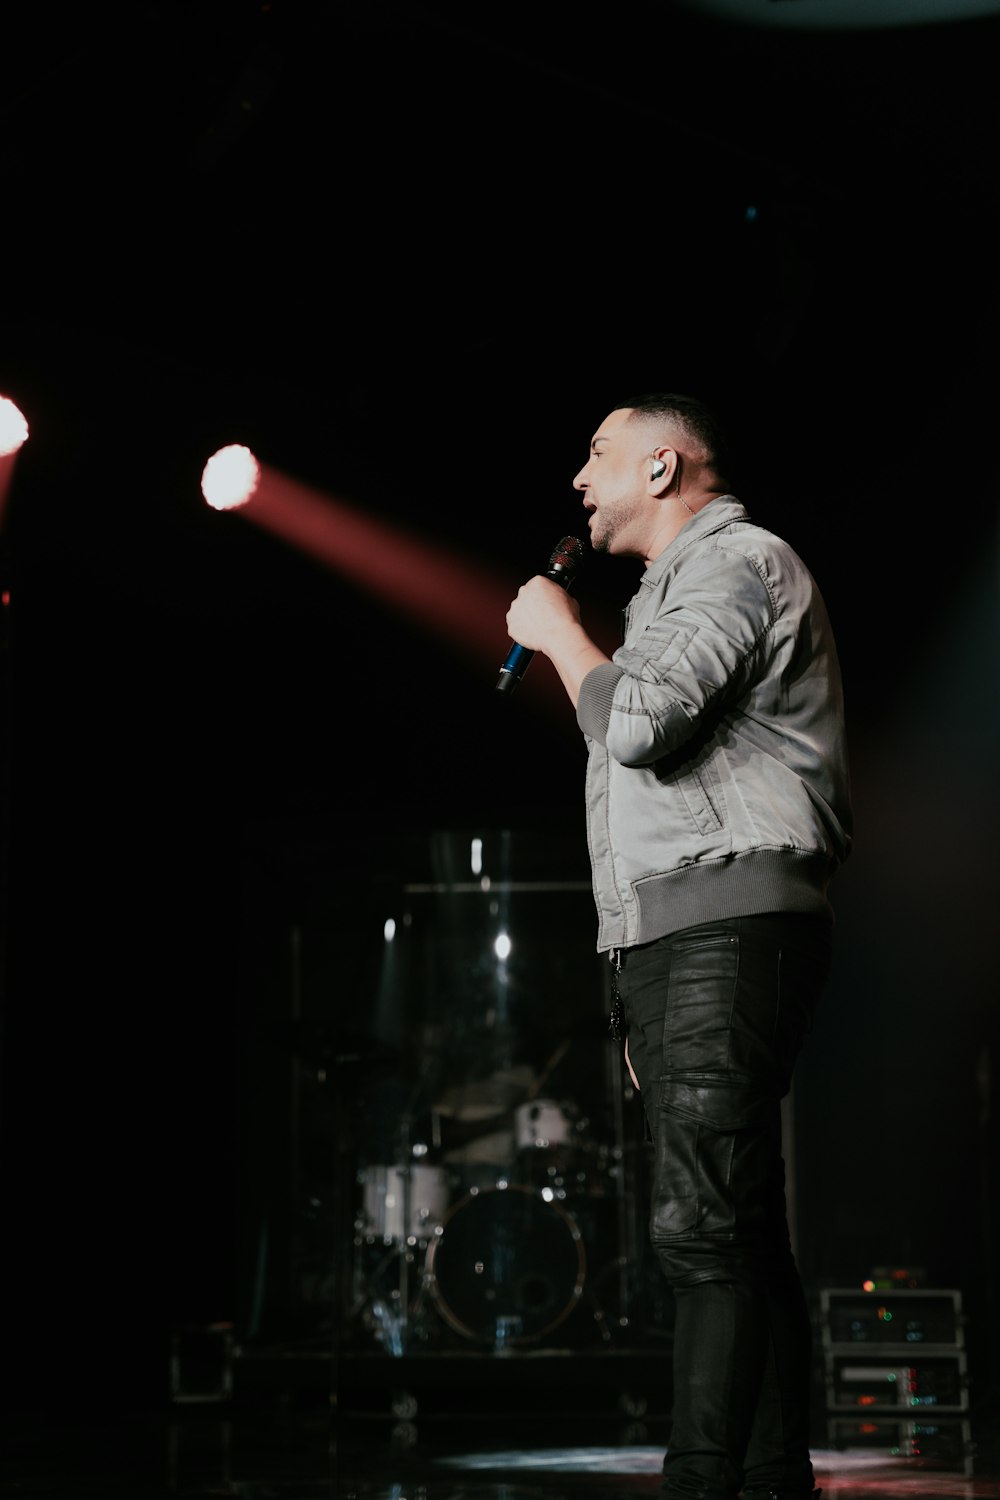 a man standing on a stage holding a microphone